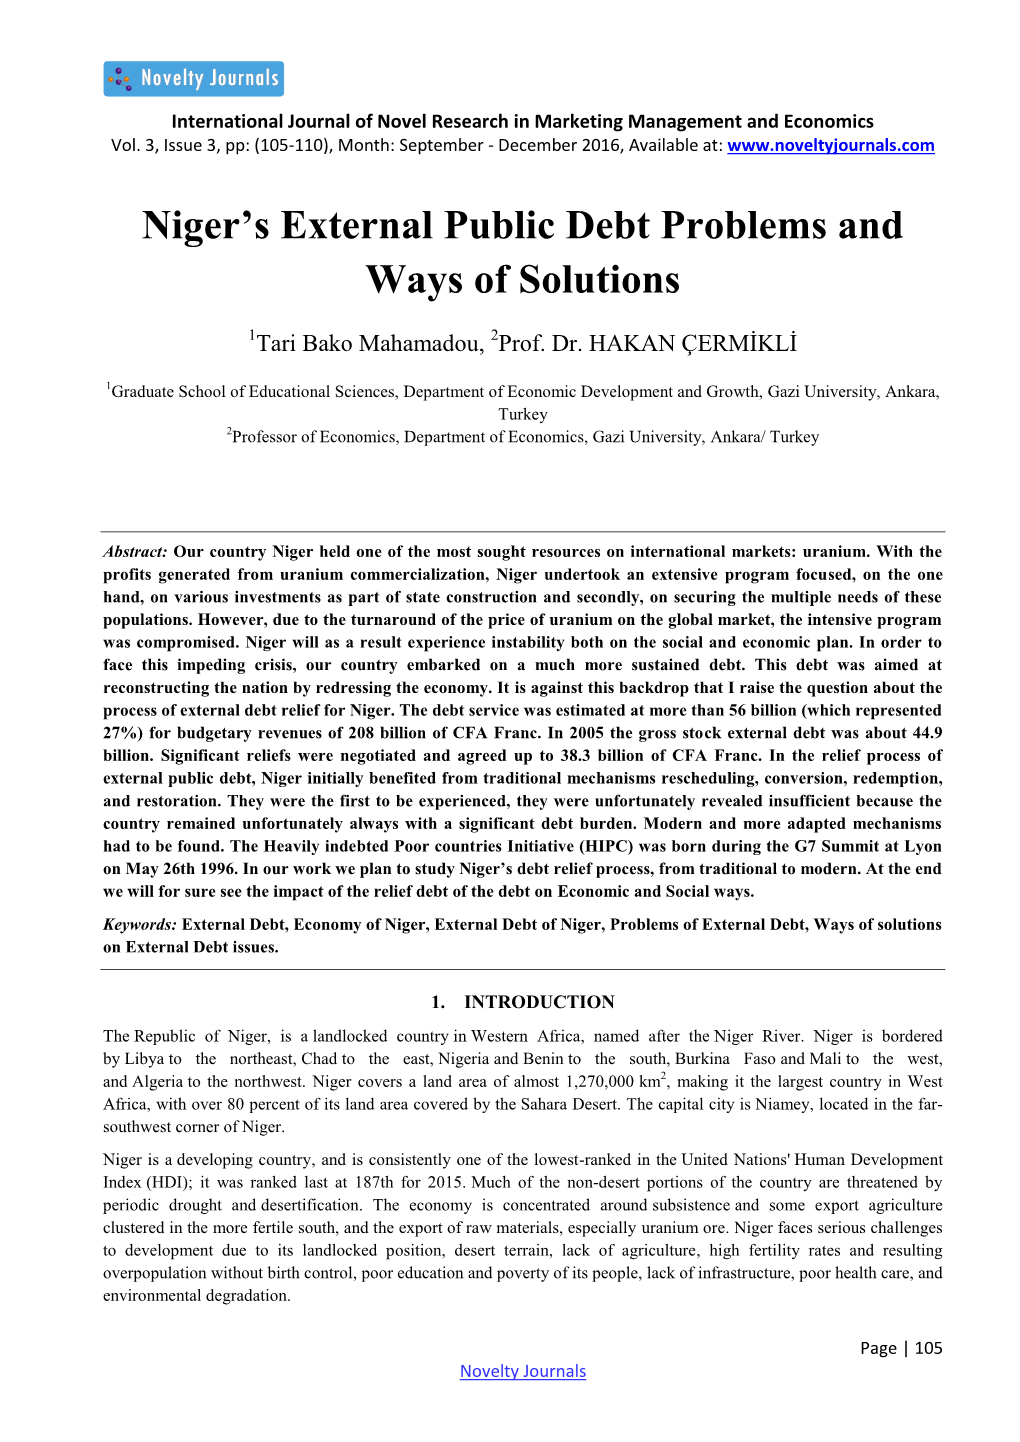 Niger's External Public Debt Problems and Ways of Solutions